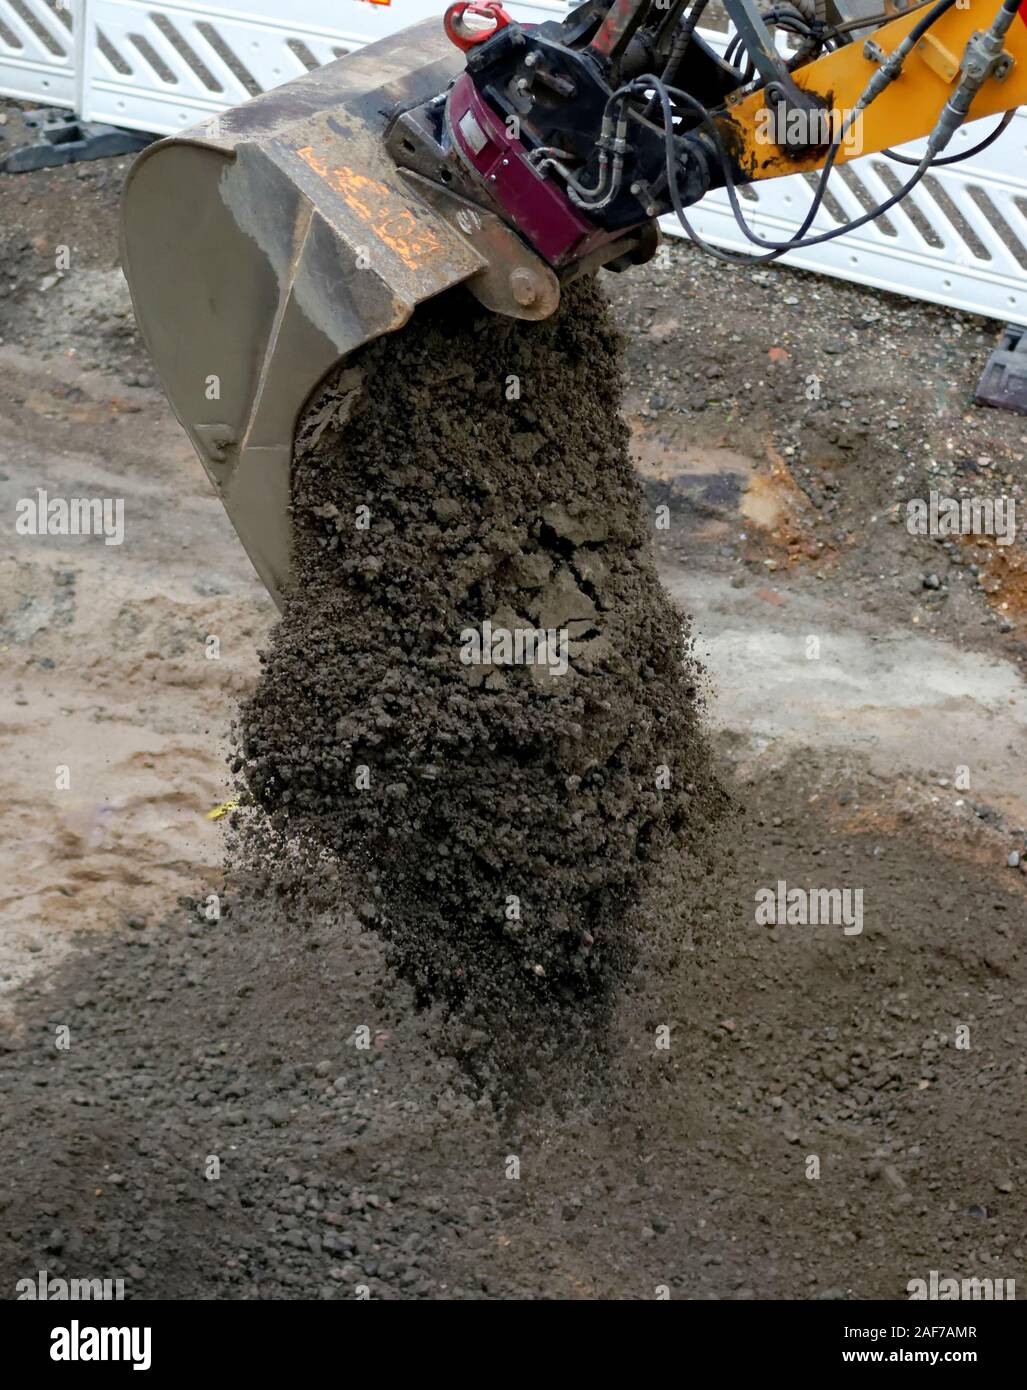 a shovel excavator unloads a load of dirt on a road construction site Stock Photo